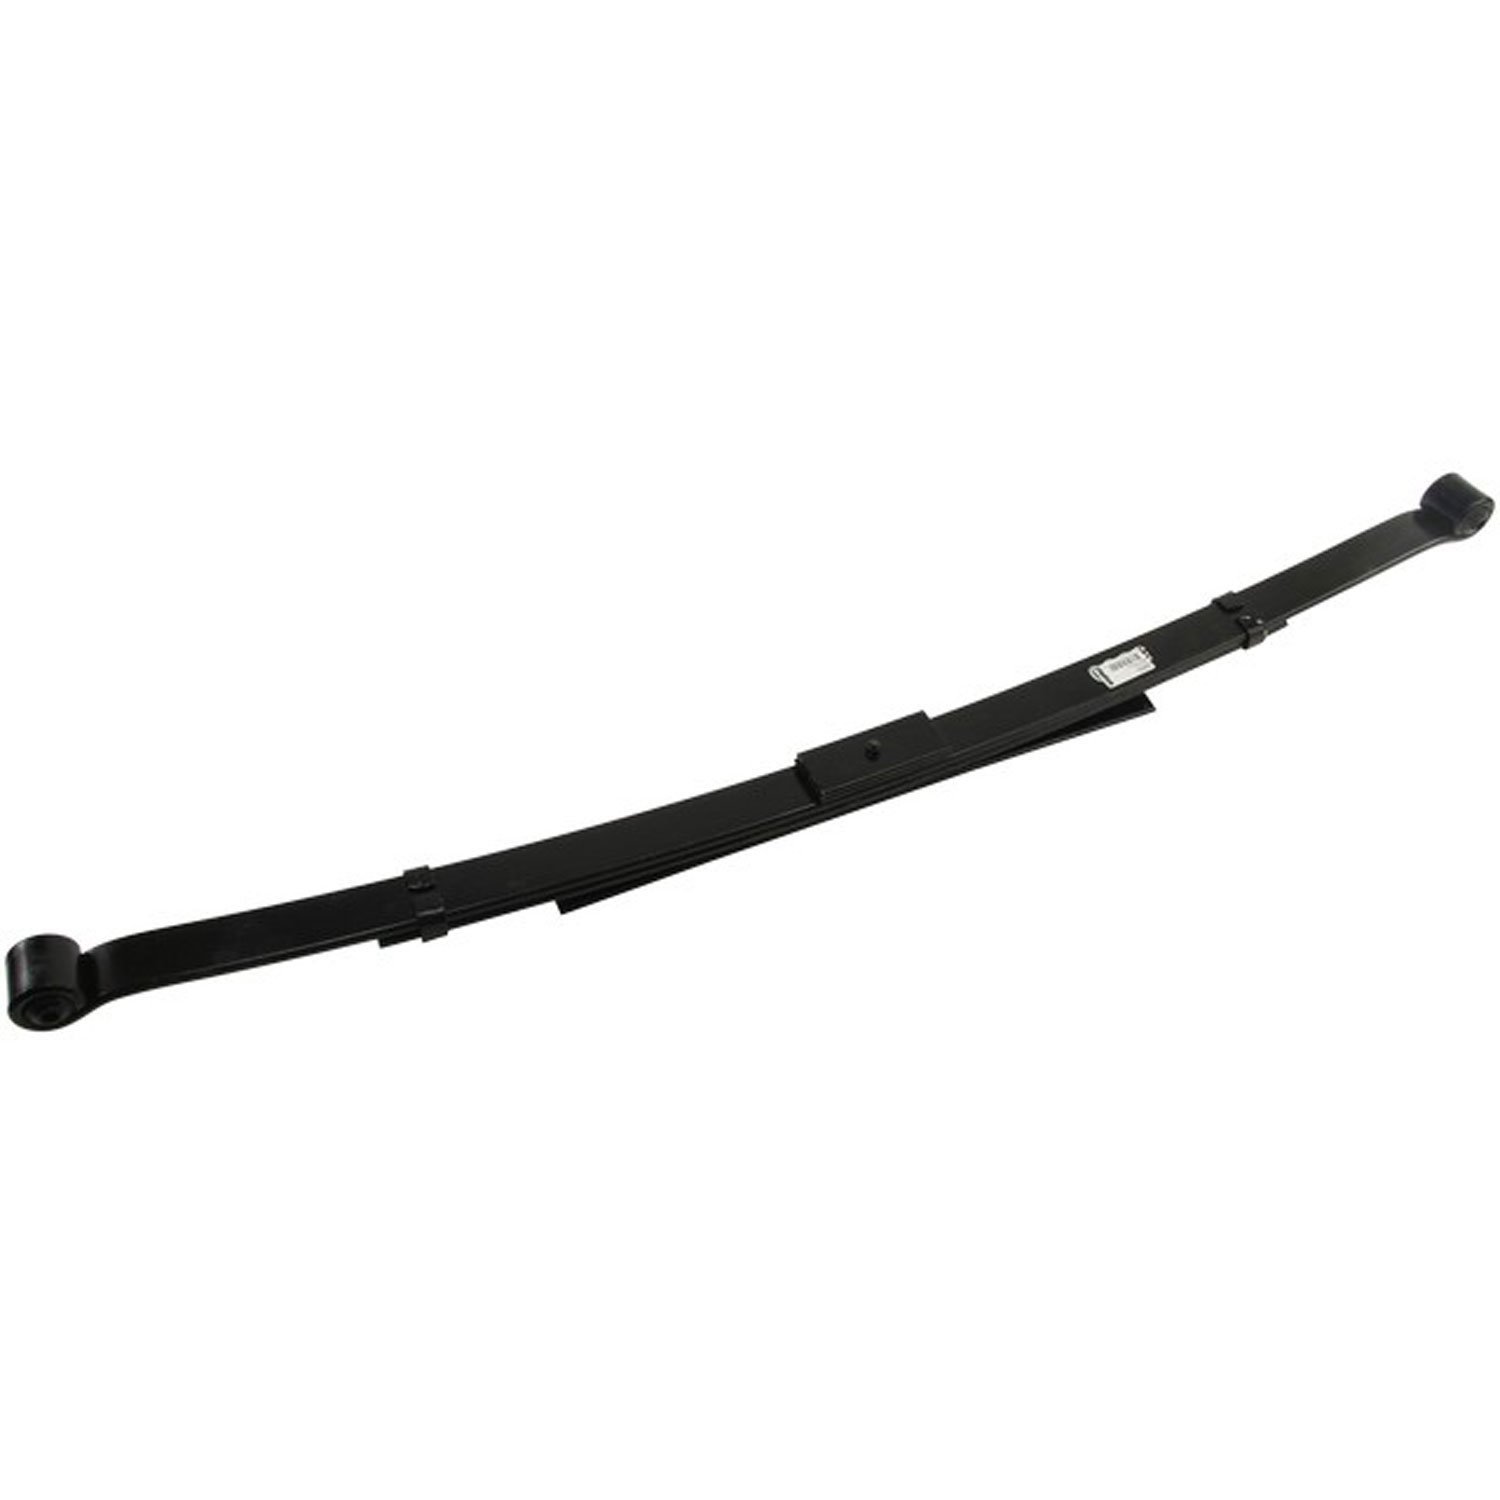 Rear Leaf Spring for 1964-1966 Ford Mustang Factory